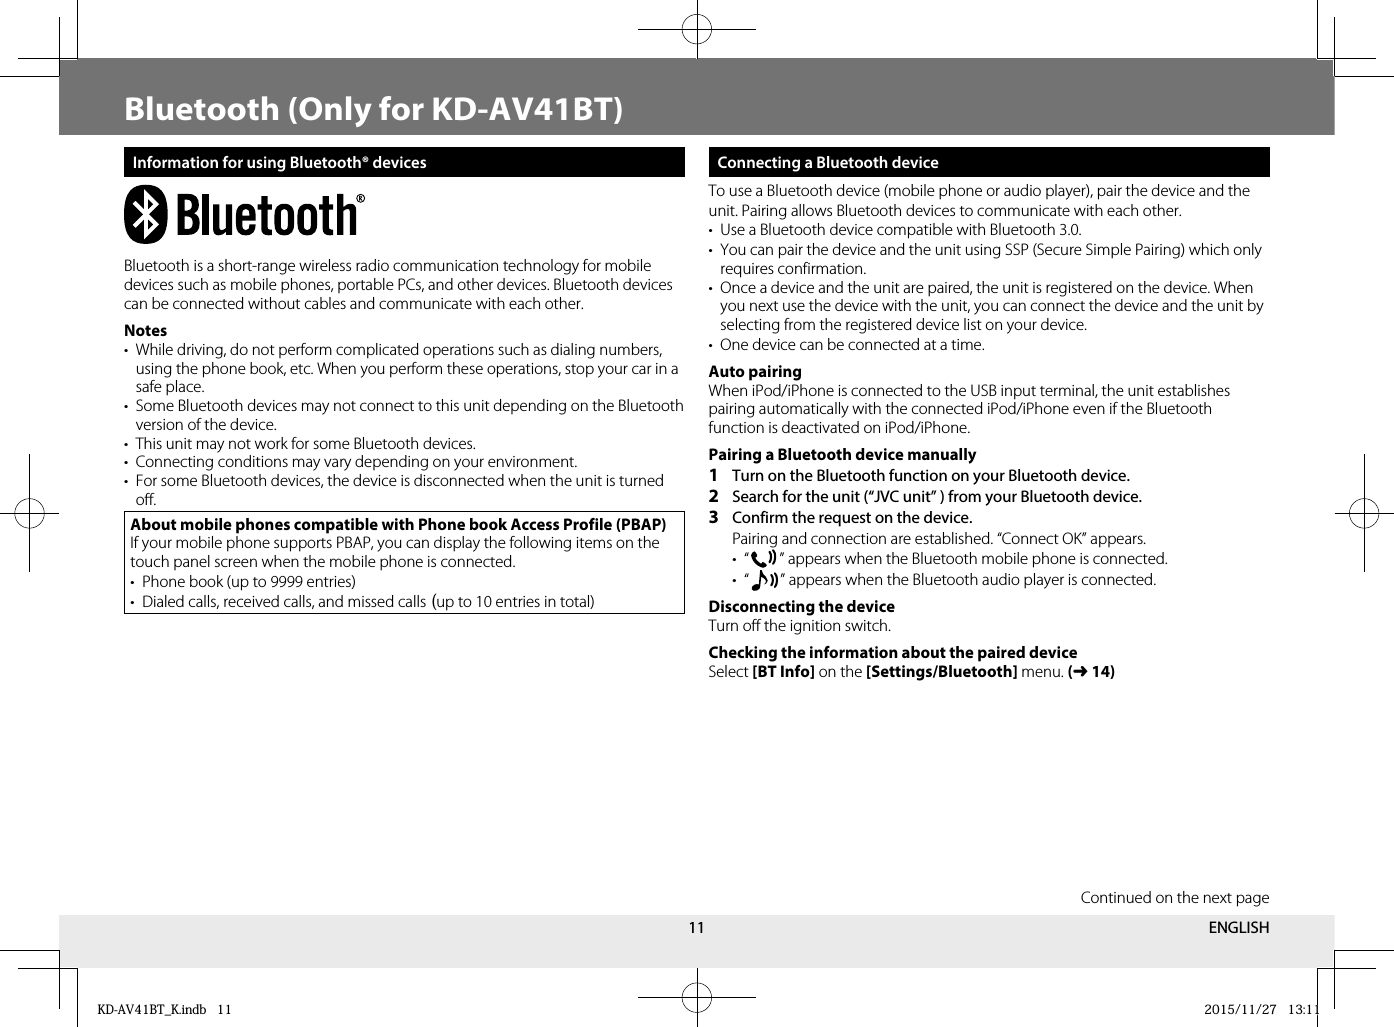 11Bluetooth (Only for KD-AV41BT)Information for using Bluetooth® devicesBluetooth is a short-range wireless radio communication technology for mobile devices such as mobile phones, portable PCs, and other devices. Bluetooth devices can be connected without cables and communicate with each other. Notes•  While driving, do not perform complicated operations such as dialing numbers, using the phone book, etc. When you perform these operations, stop your car in a safe place.•  Some Bluetooth devices may not connect to this unit depending on the Bluetooth version of the device.•  This unit may not work for some Bluetooth devices.•  Connecting conditions may vary depending on your environment.•  For some Bluetooth devices, the device is disconnected when the unit is turned off.About mobile phones compatible with Phone book Access Profile (PBAP)If your mobile phone supports PBAP, you can display the following items on the touch panel screen when the mobile phone is connected.•  Phone book (up to 9999 entries)•  Dialed calls, received calls, and missed calls (up to 10 entries in total) Connecting a Bluetooth deviceTo use a Bluetooth device (mobile phone or audio player), pair the device and the unit. Pairing allows Bluetooth devices to communicate with each other.•  Use a Bluetooth device compatible with Bluetooth 3.0.•  You can pair the device and the unit using SSP (Secure Simple Pairing) which only requires confirmation.•  Once a device and the unit are paired, the unit is registered on the device. When you next use the device with the unit, you can connect the device and the unit by selecting from the registered device list on your device.•  One device can be connected at a time.Auto pairingWhen iPod/iPhone is connected to the USB input terminal, the unit establishes pairing automatically with the connected iPod/iPhone even if the Bluetooth function is deactivated on iPod/iPhone.Pairing a Bluetooth device manually1  Turn on the Bluetooth function on your Bluetooth device.2  Search for the unit (“JVC unit” ) from your Bluetooth device.3  Confirm the request on the device.   Pairing and connection are established. “Connect OK” appears. • “   ” appears when the Bluetooth mobile phone is connected. • “   ” appears when the Bluetooth audio player is connected.Disconnecting the deviceTurn off the ignition switch.Checking the information about the paired deviceSelect [BT Info] on the [Settings/Bluetooth] menu. (➜14)Continued on the next pageENGLISHKD-AV41BT_K.indb   11KD-AV41BT_K.indb   11 2015/11/27   13:112015/11/27   13:11